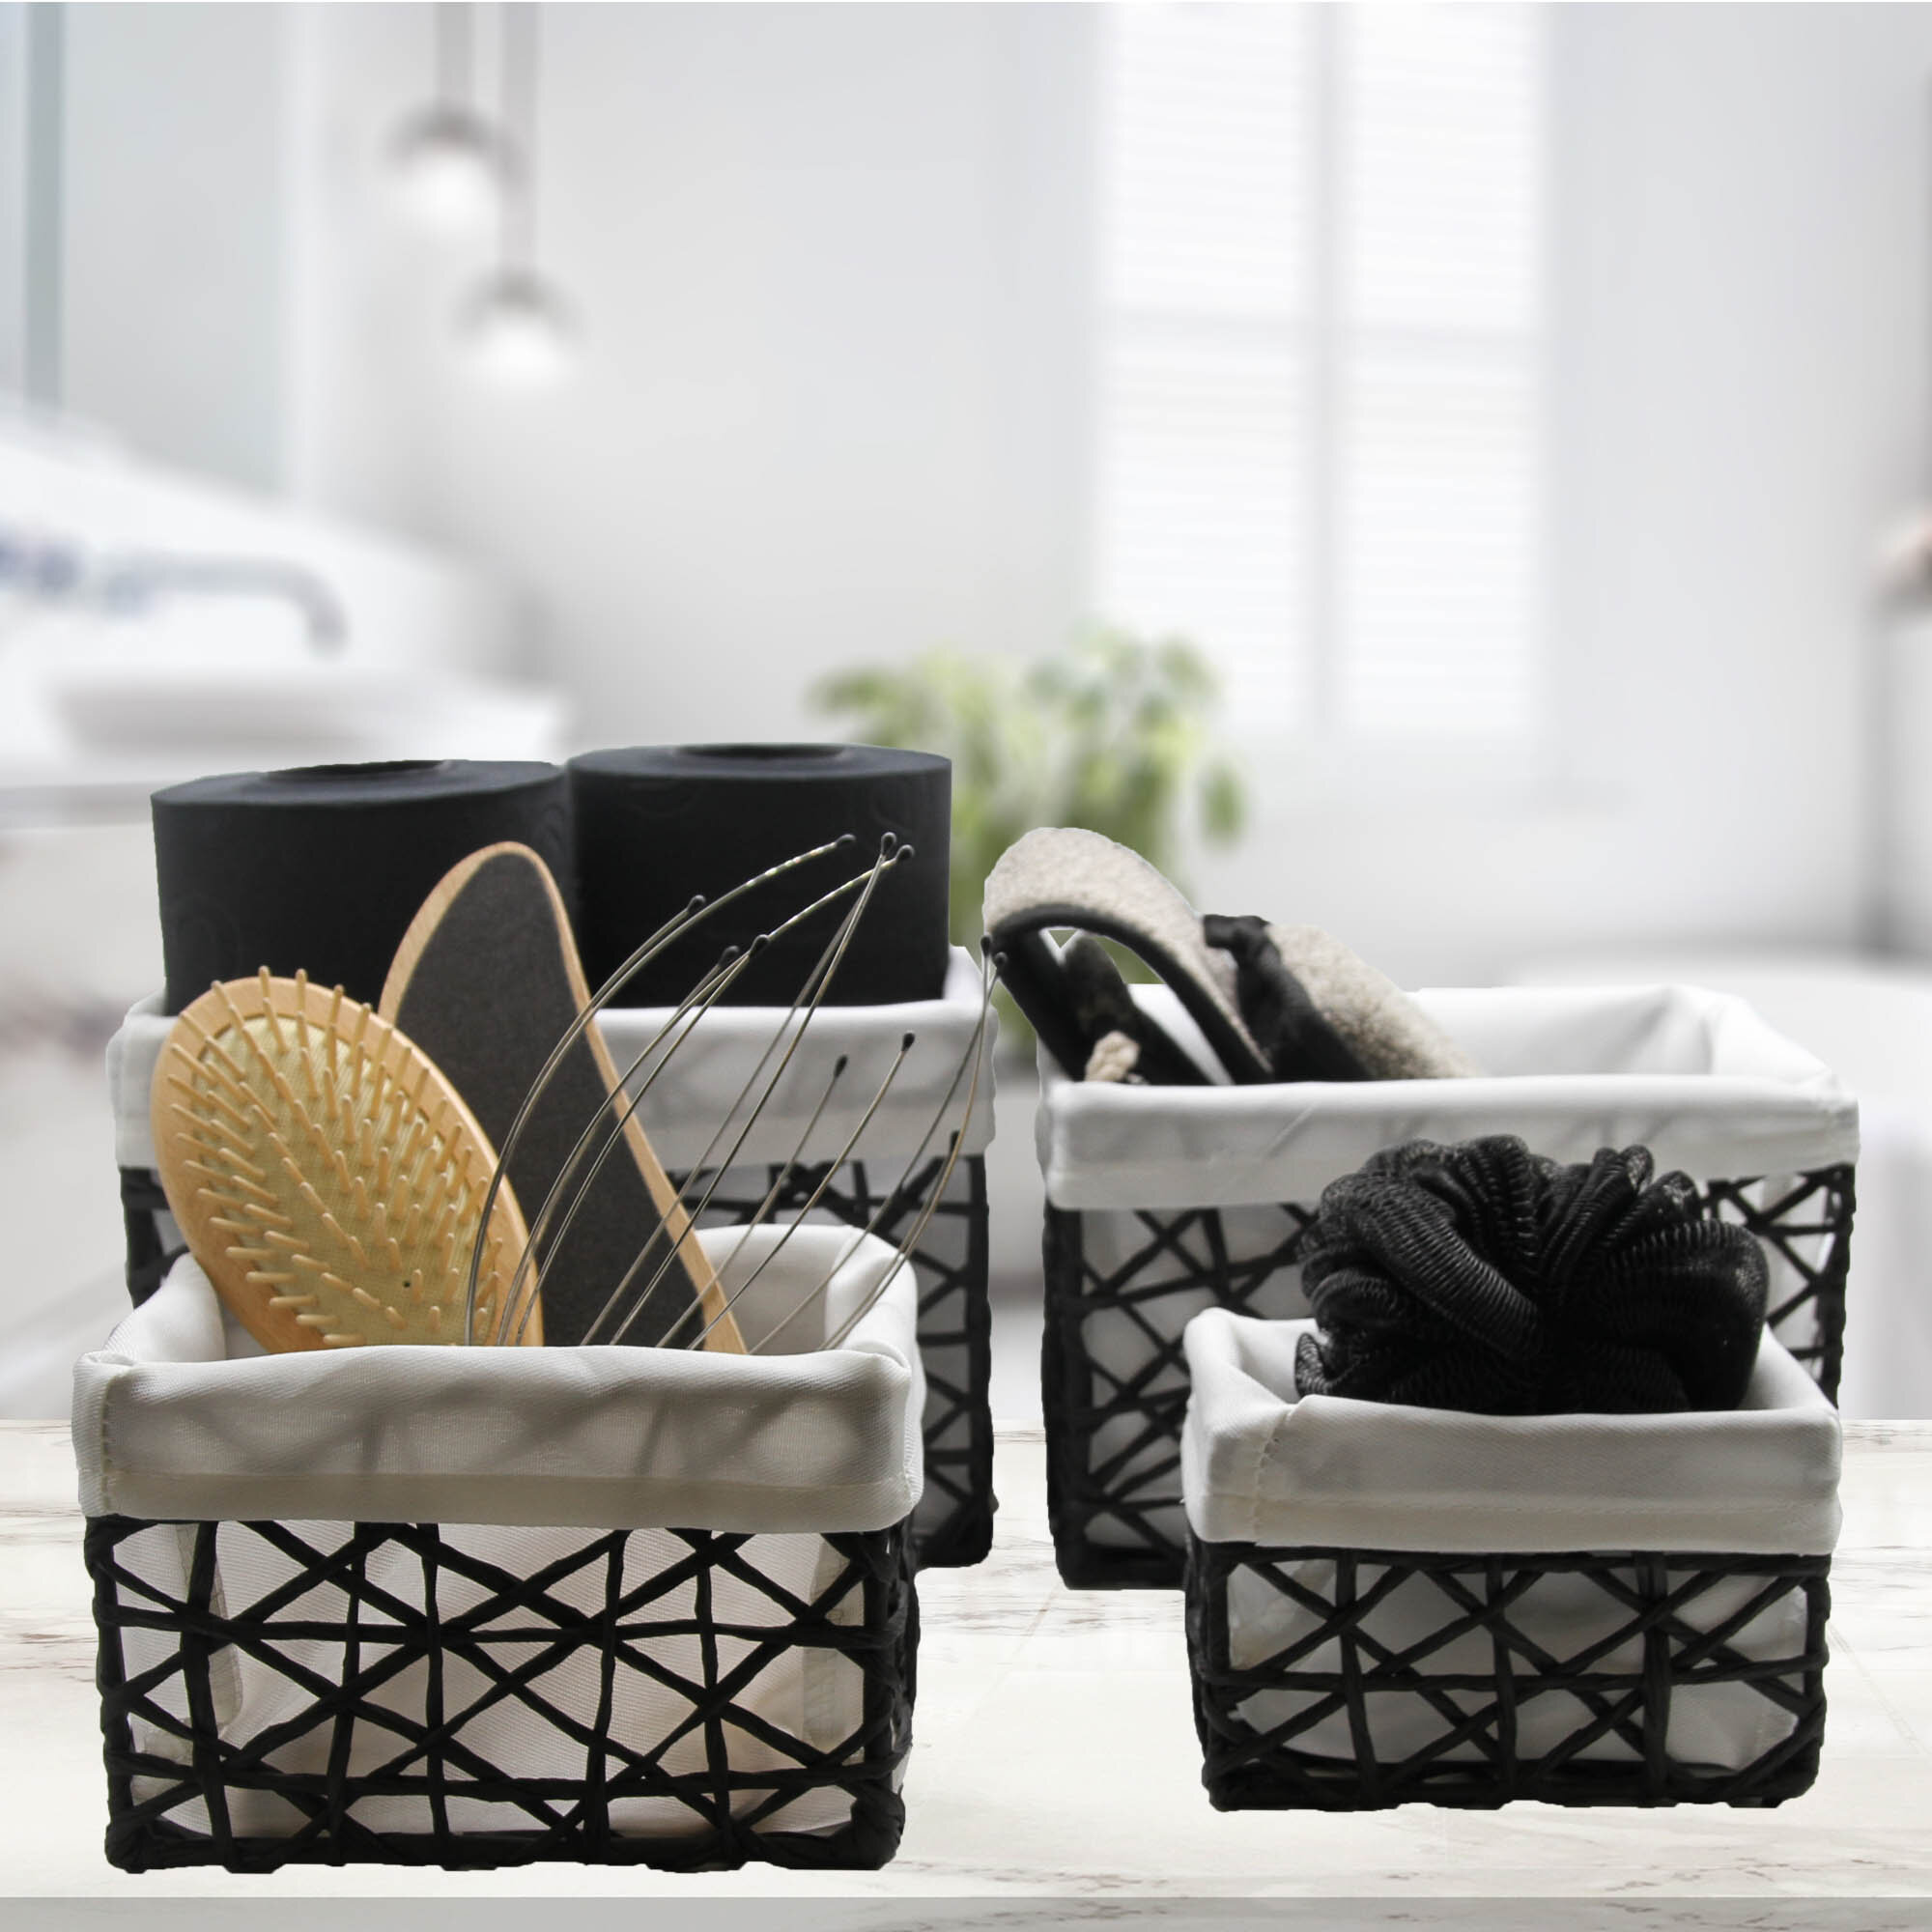 Sorbus Woven Paper Rope Baskets - 4 Piece Set, Gray